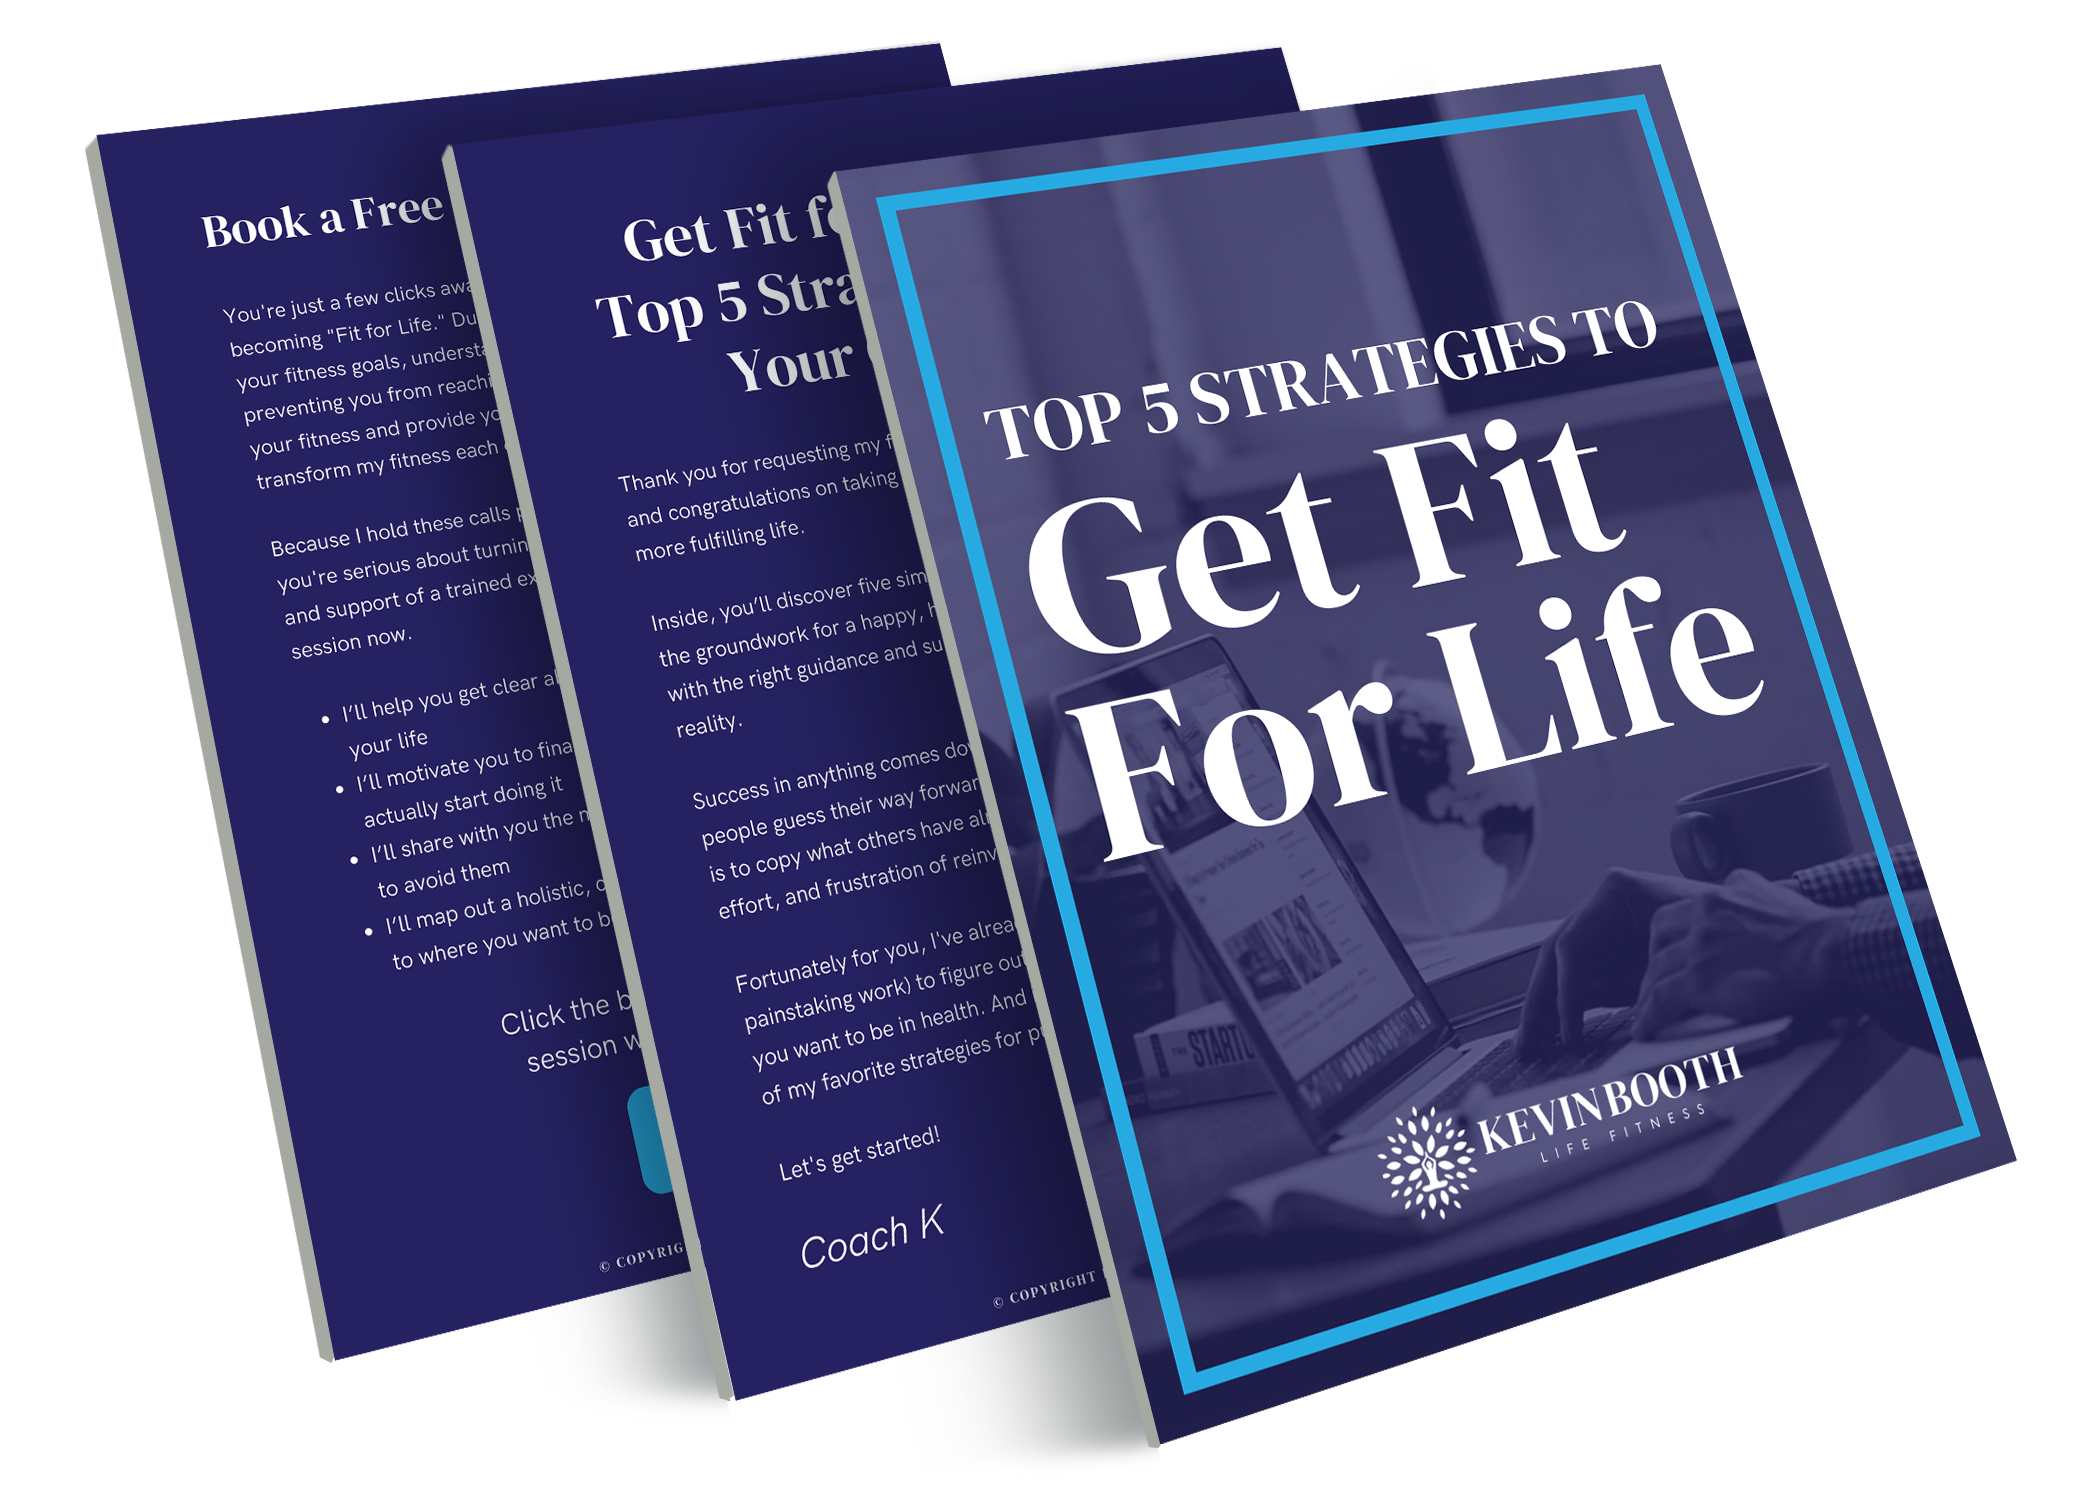 Image of "Top 5 Strategies to Get Fit For Life"